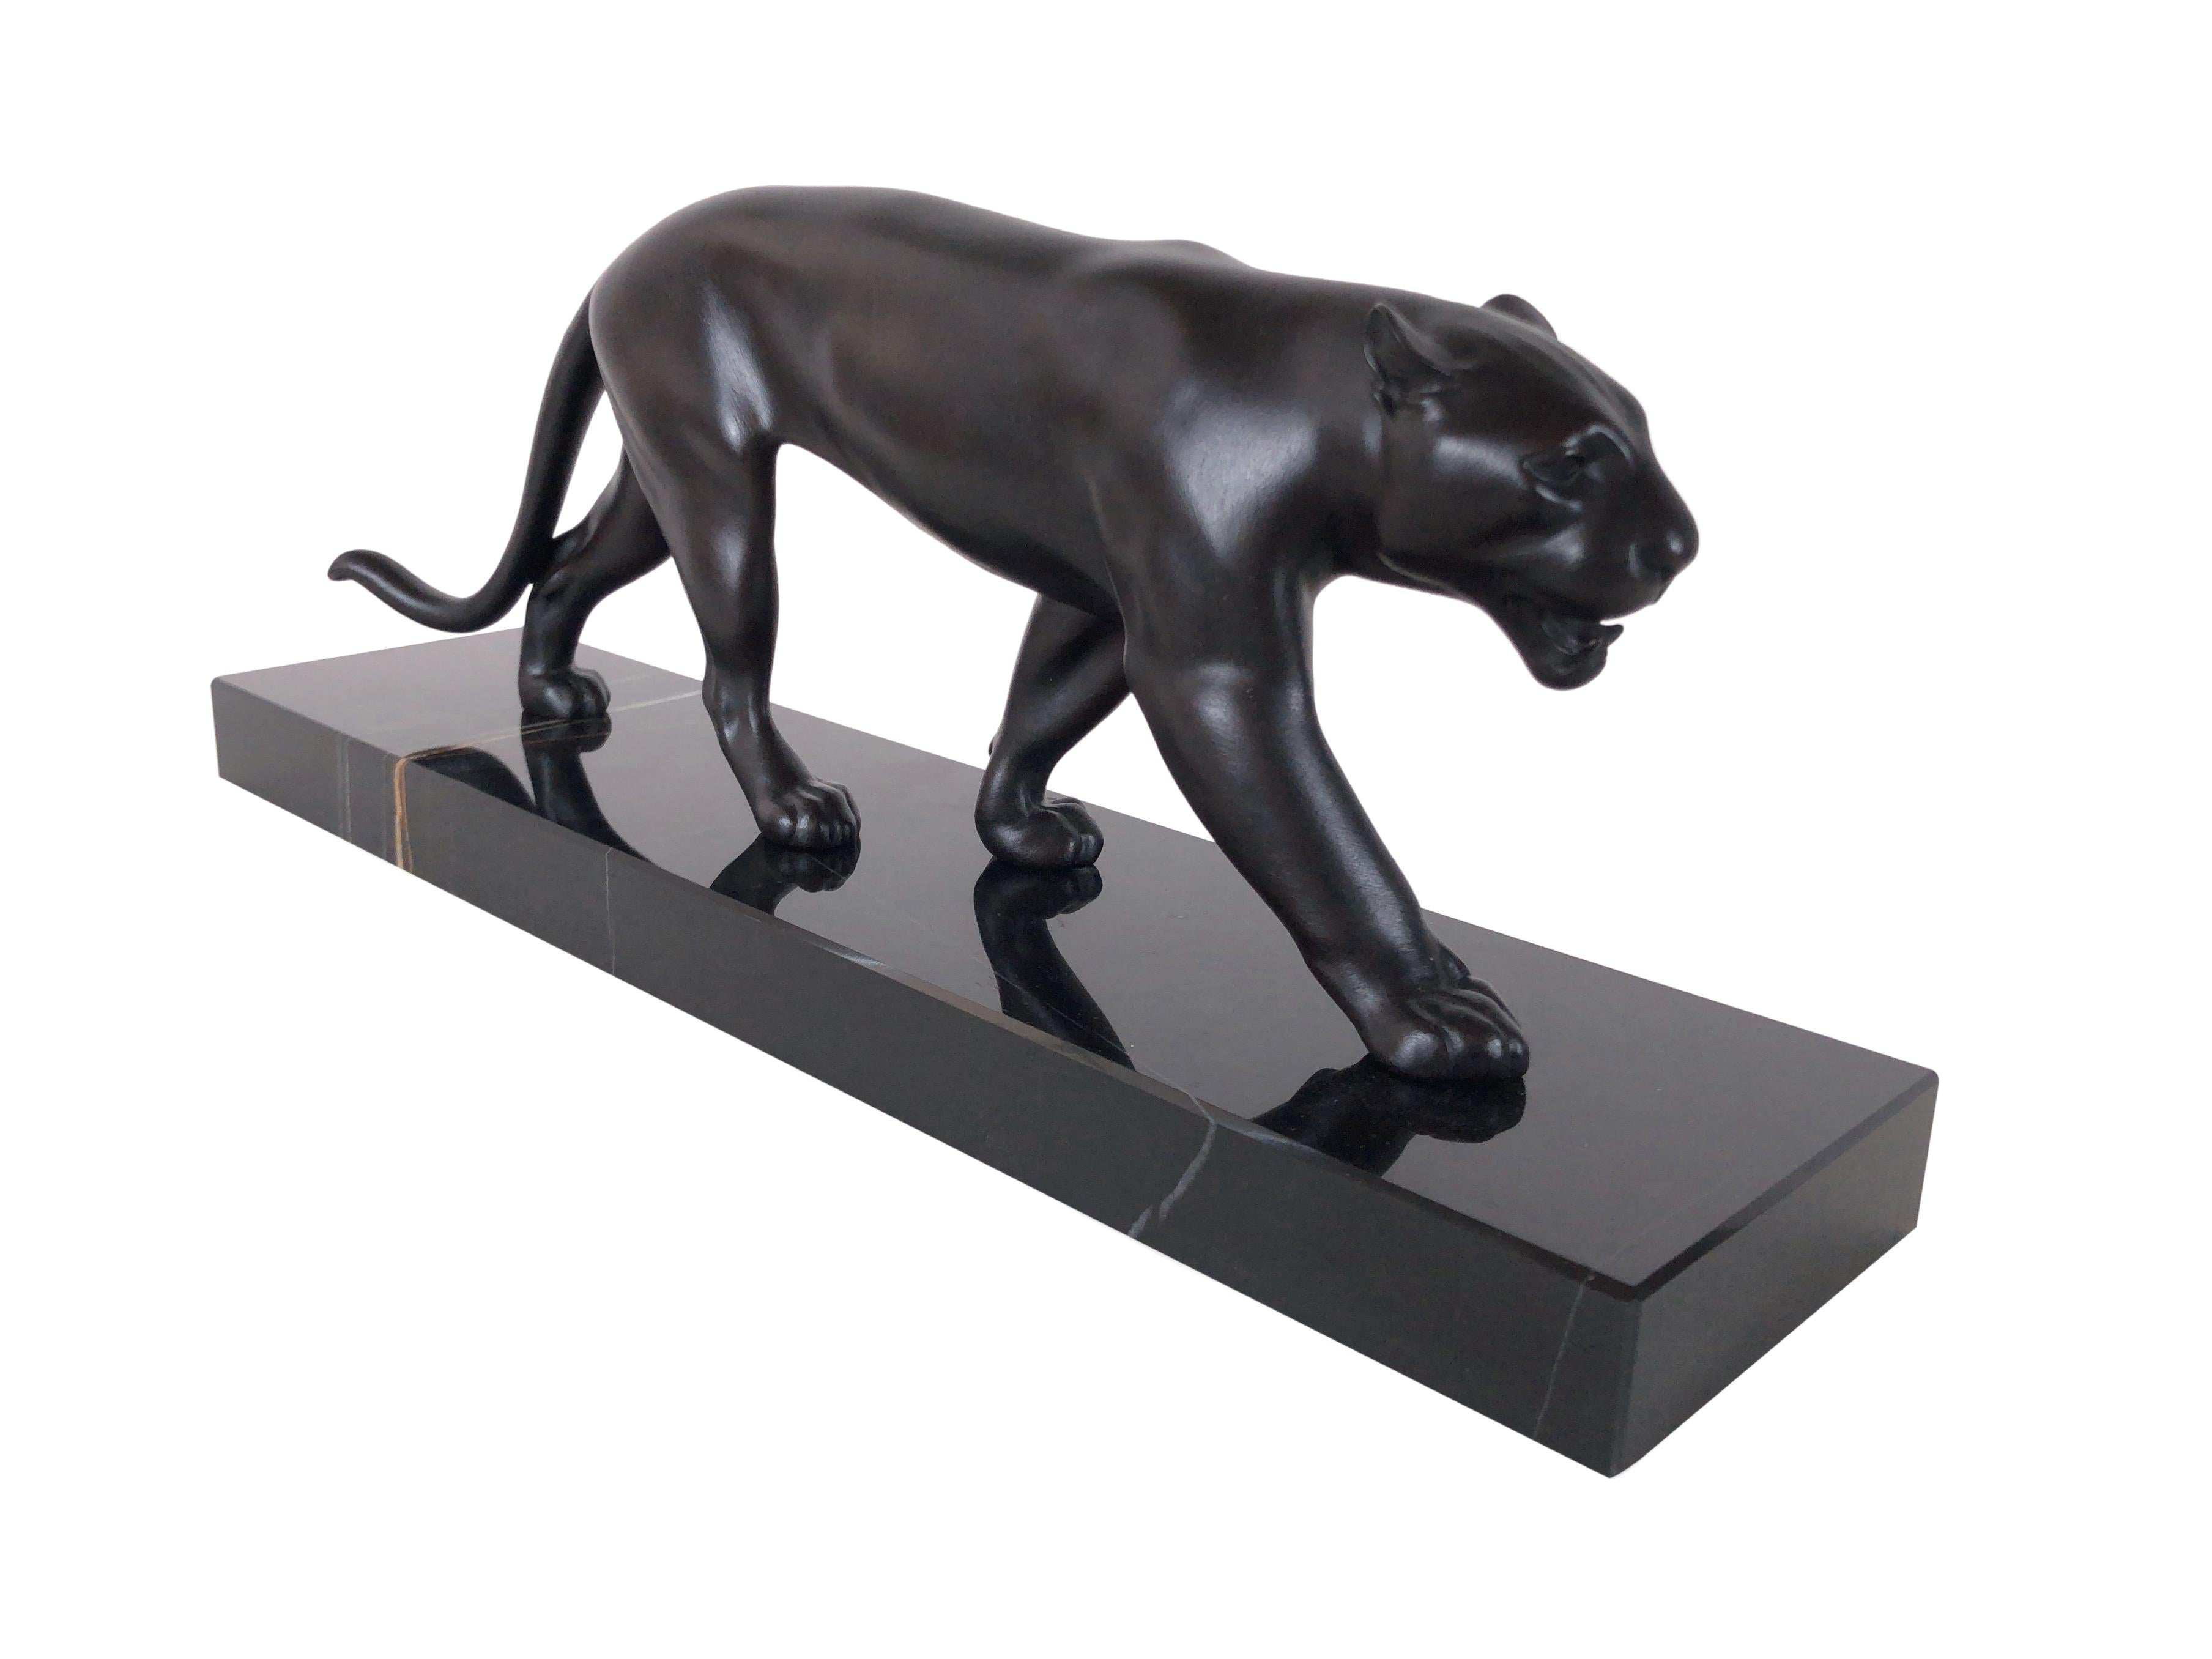 Blackened Ouganda Animal Sculpture Black Panther French Art Deco Style by Max Le Verrier For Sale